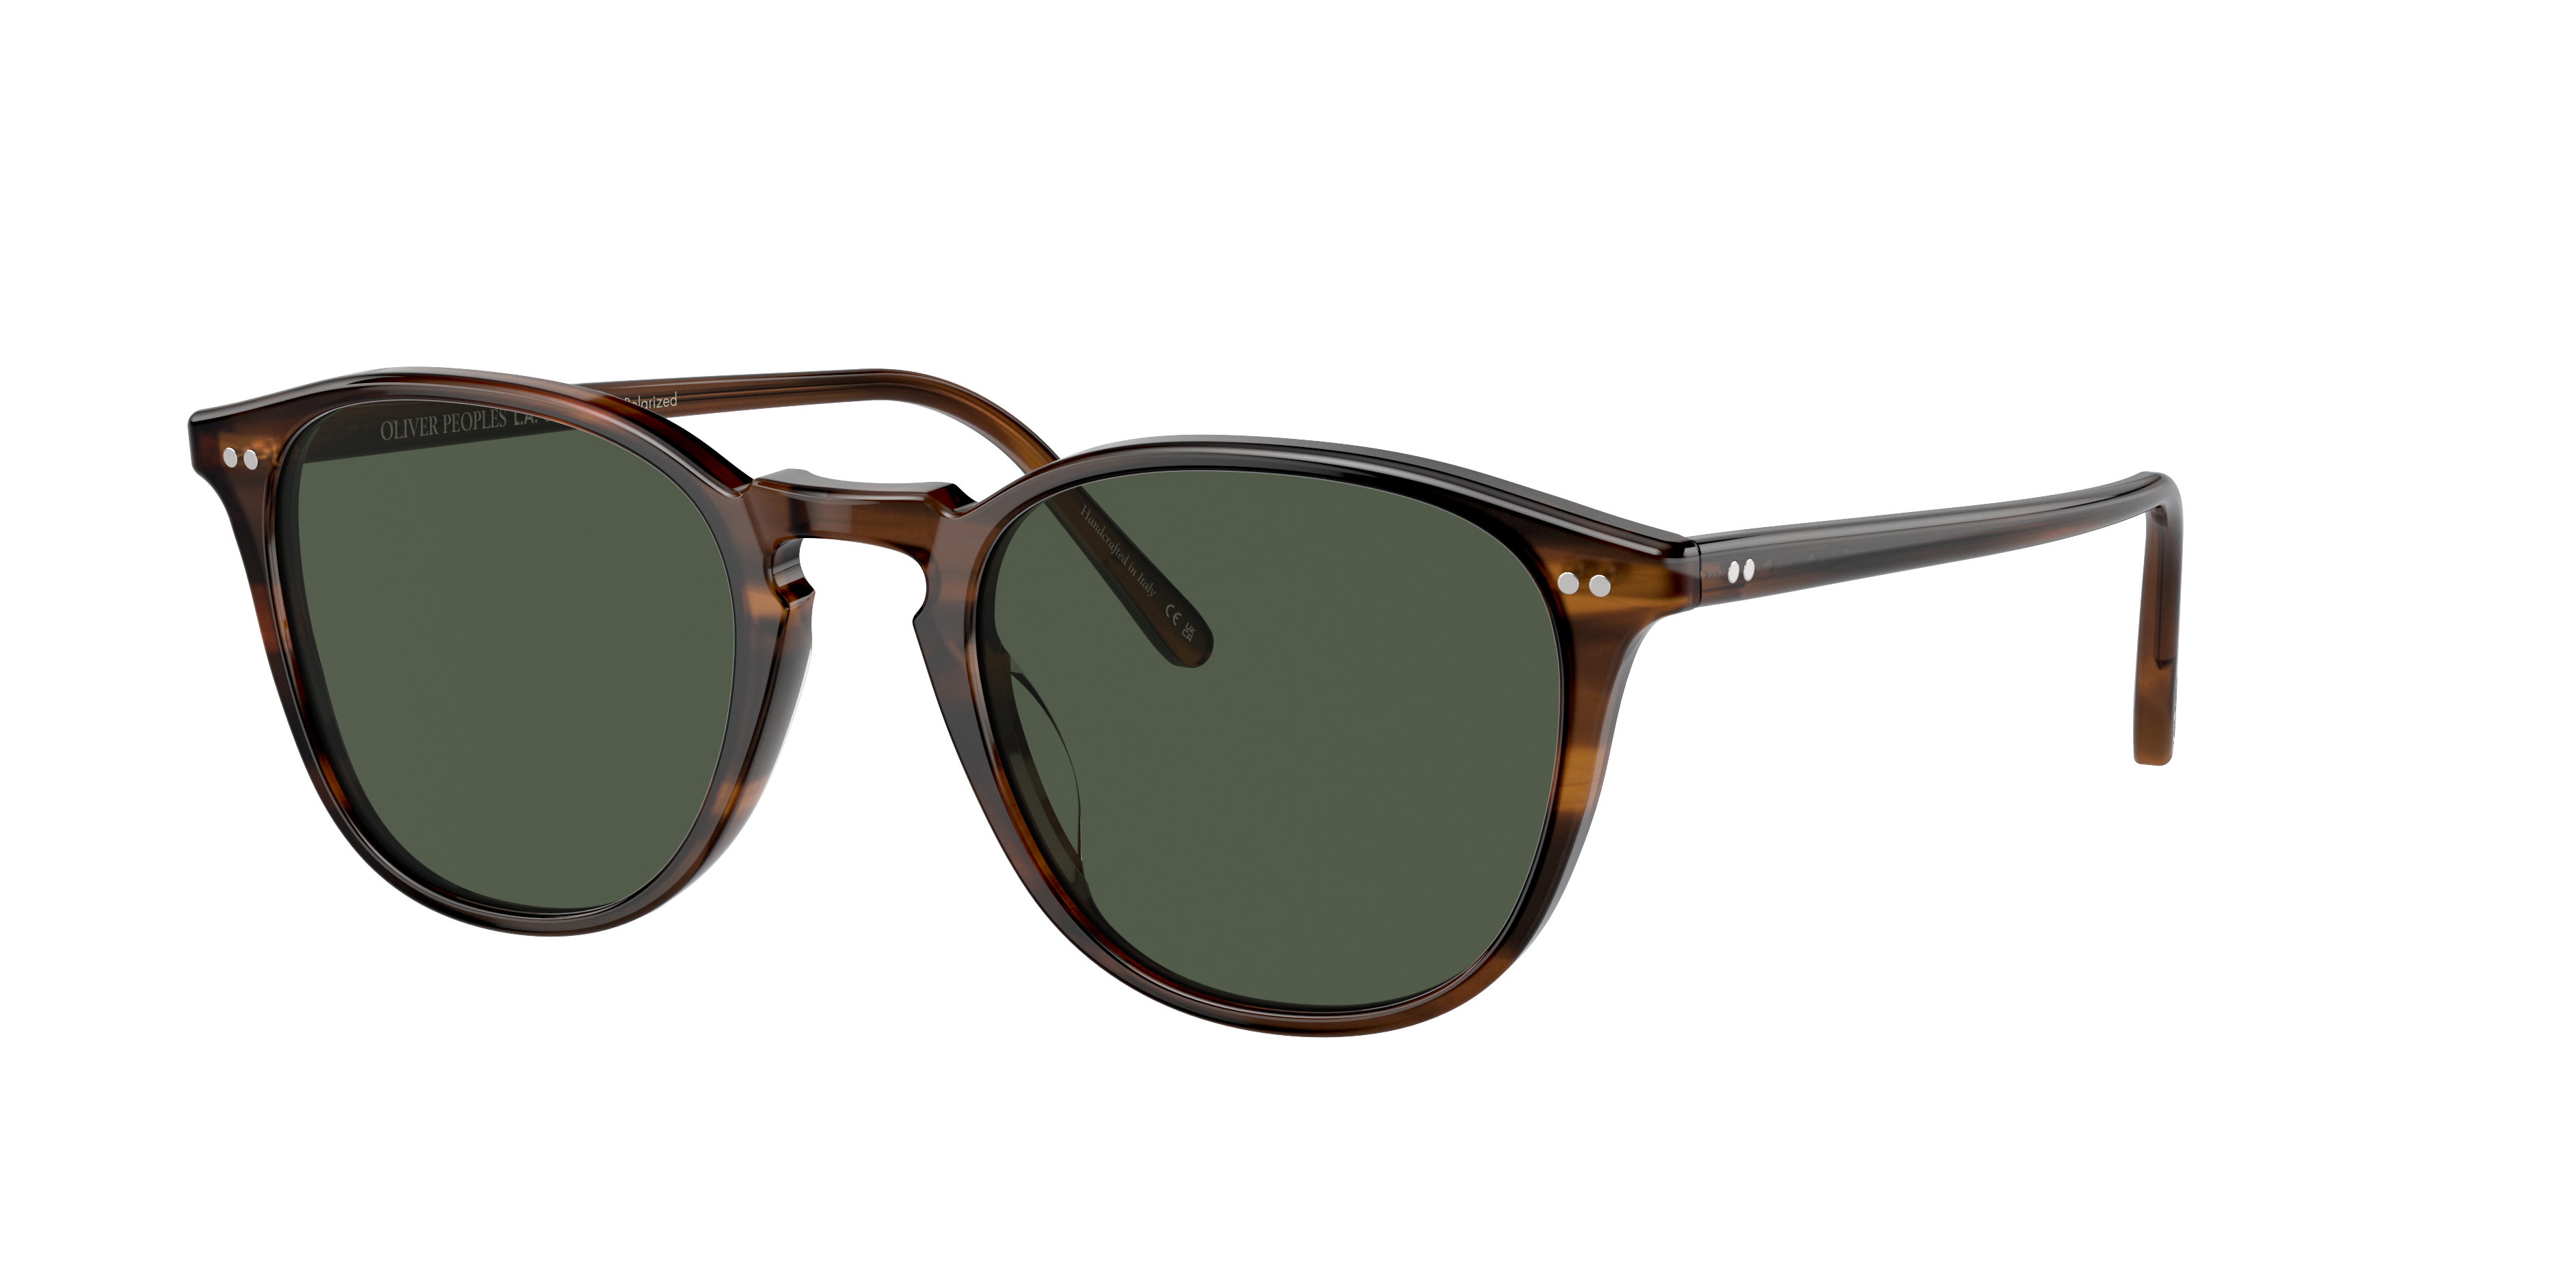 Oliver Forman L.A Sunglasses in Tuscany Tortoise | Oliver®